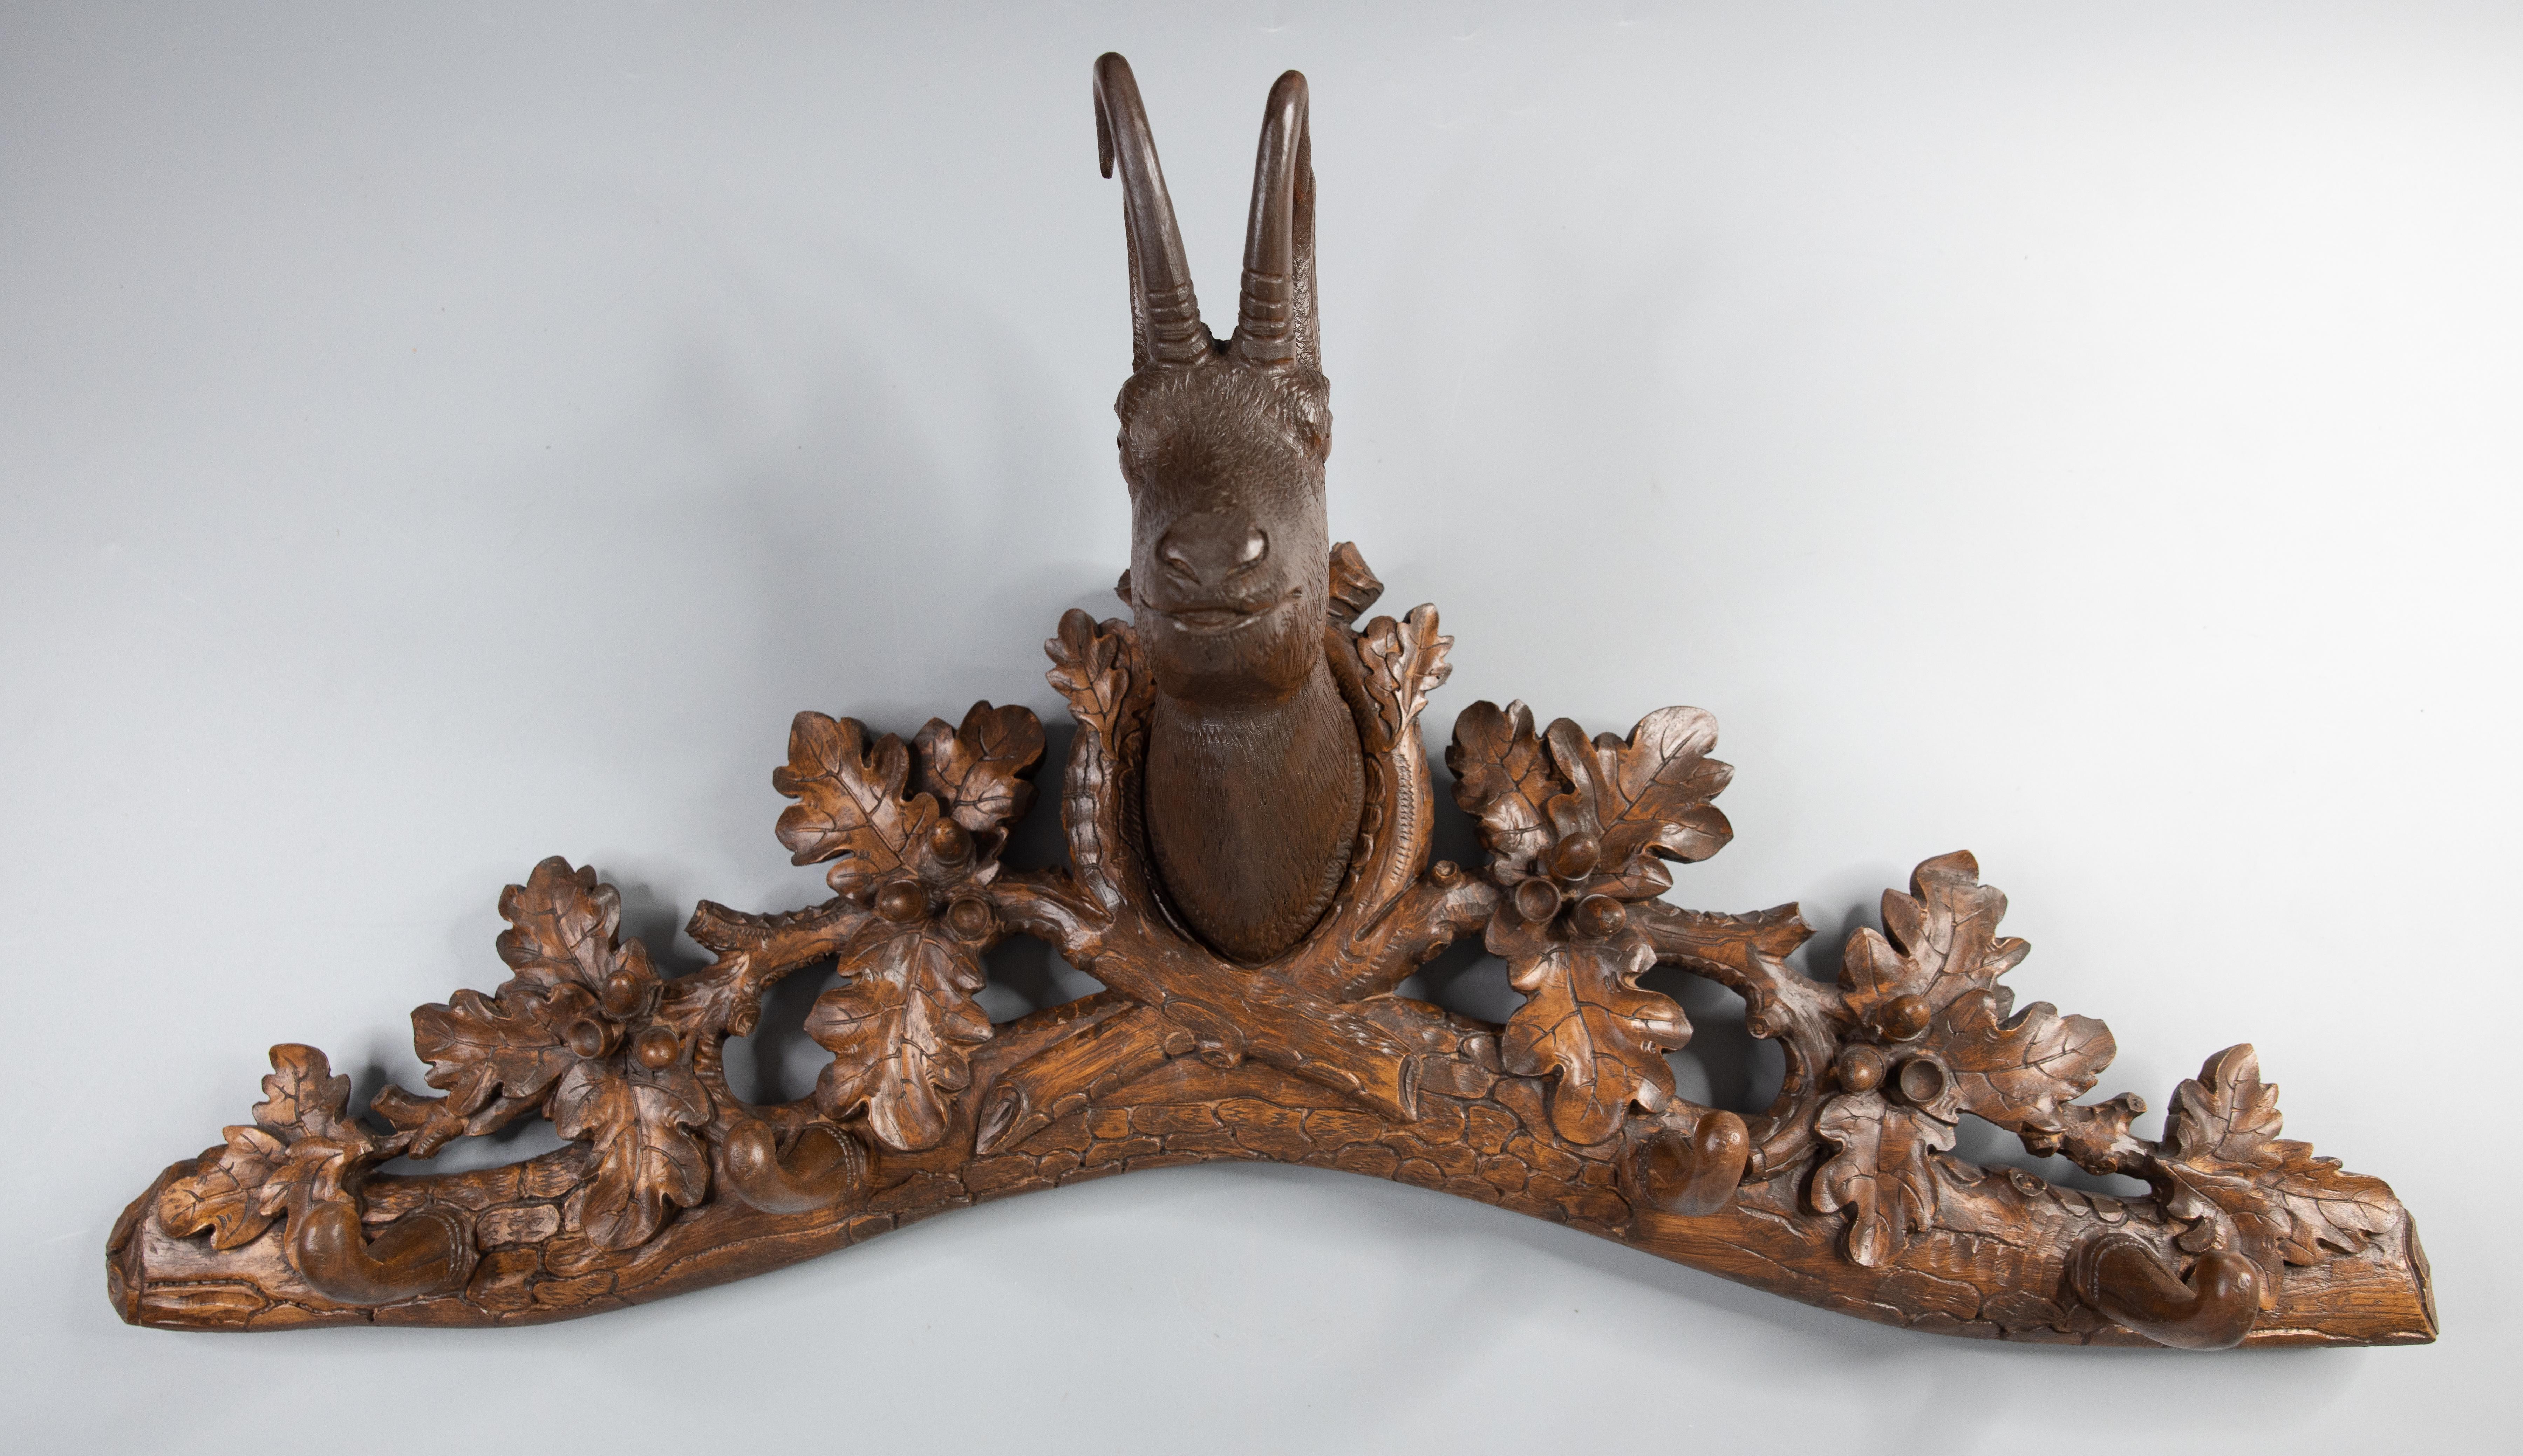 A superb antique Black Forest chamois coat and hat rack made in Switzerland, circa 1880. This fine rack features a hand carved handsome chamois surrounded by intricately carved leaves and four wooden hooks for hanging hats or coats. It's perfect for